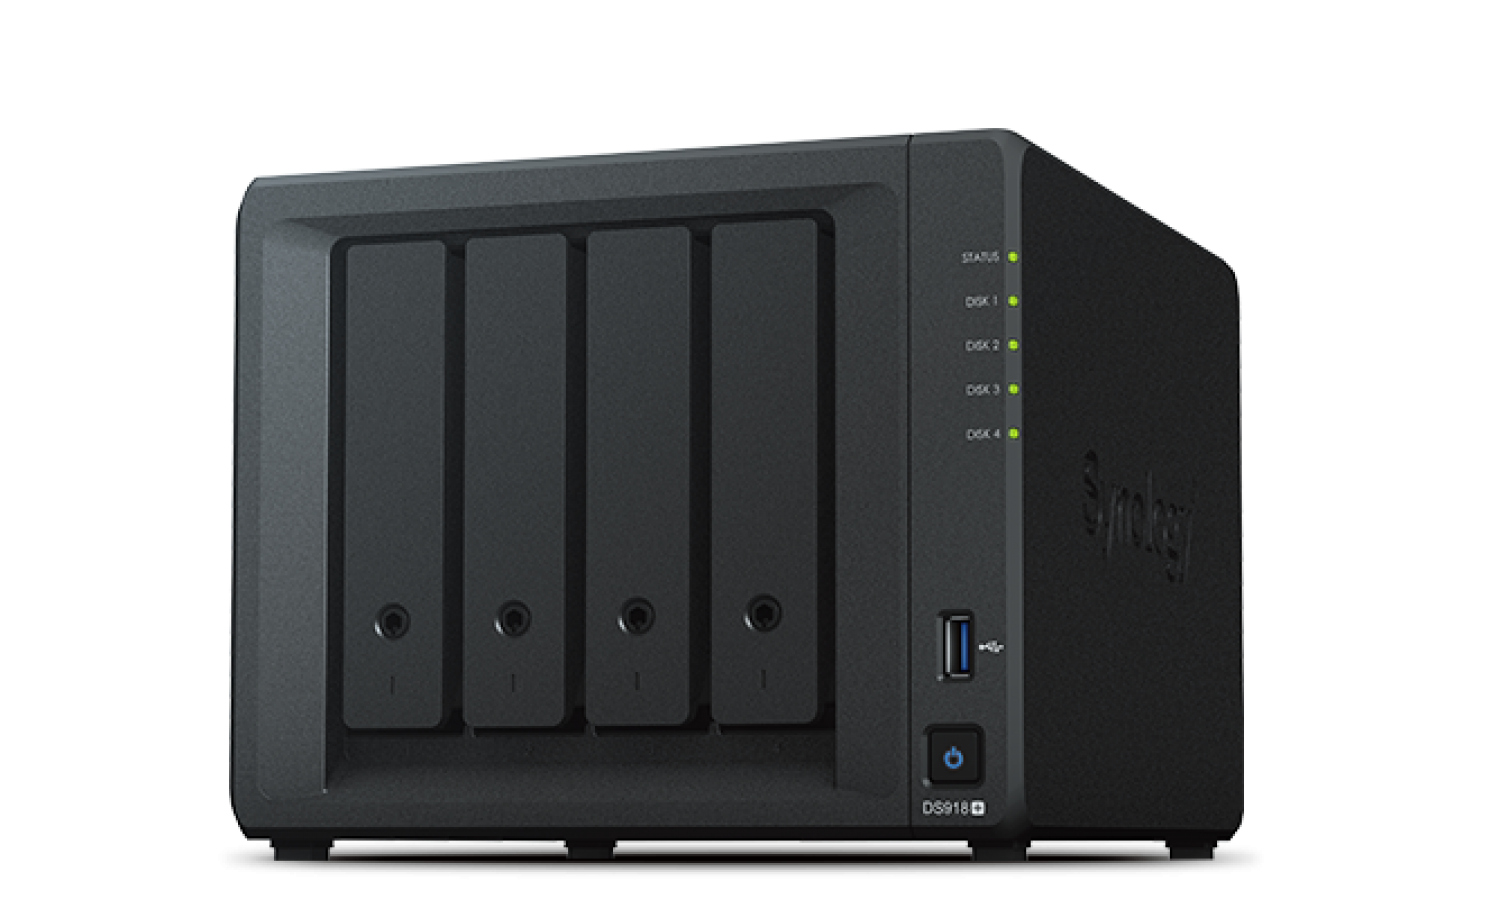 Synology built-in reverse proxy